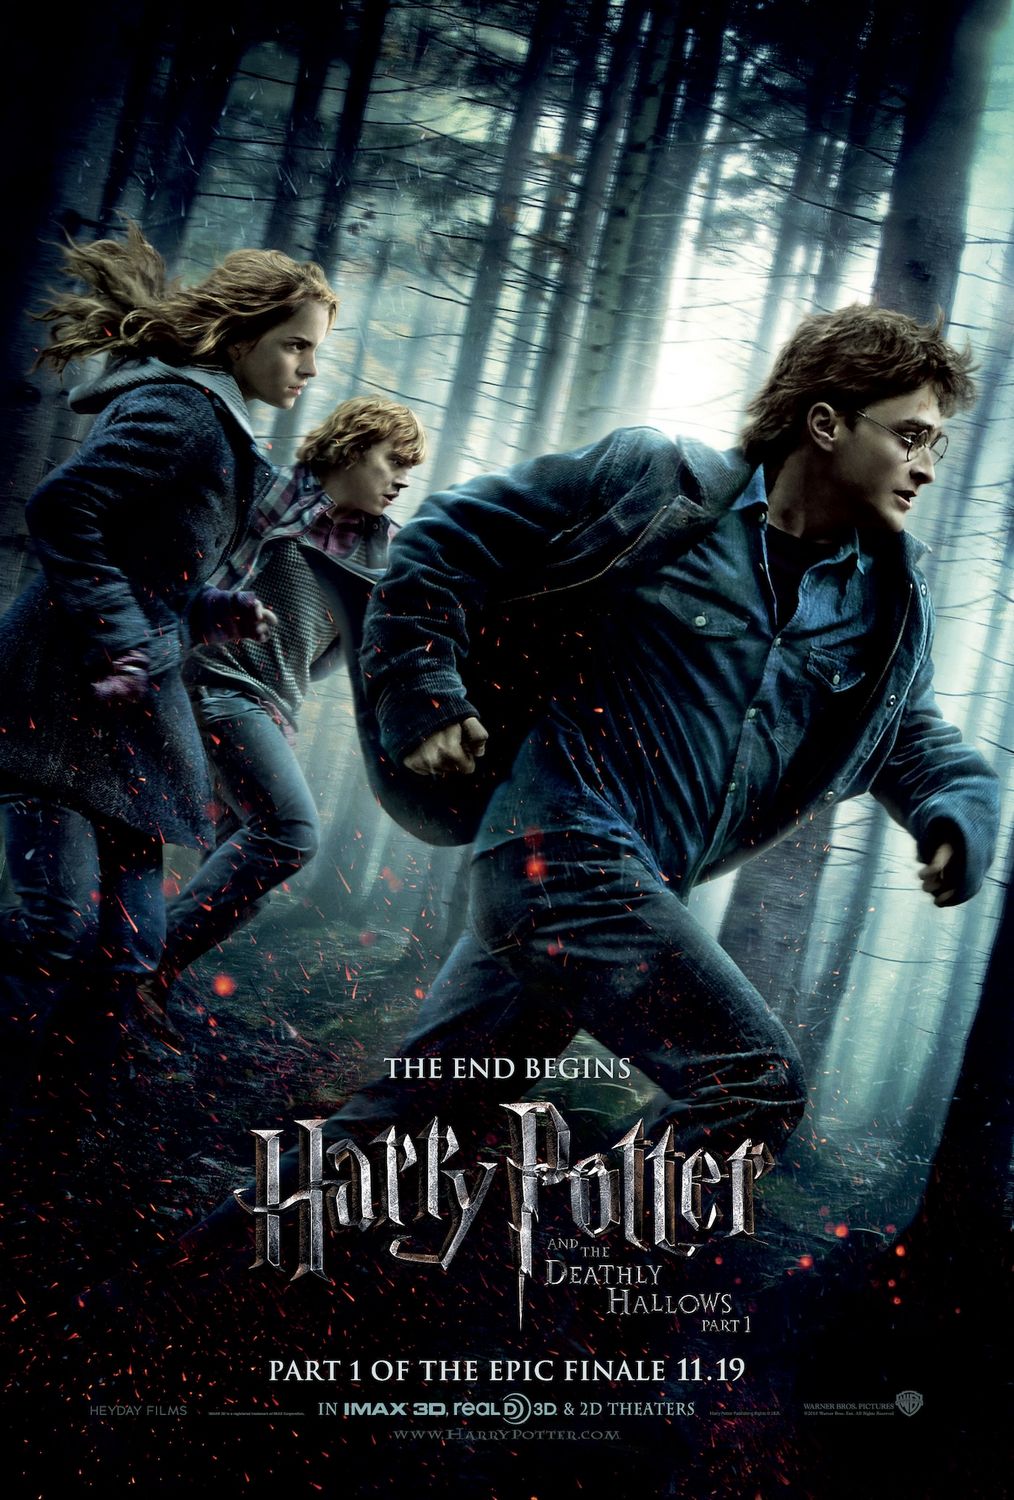 Harry Potter and the Deathly Hallows: Part 1 movies in Canada